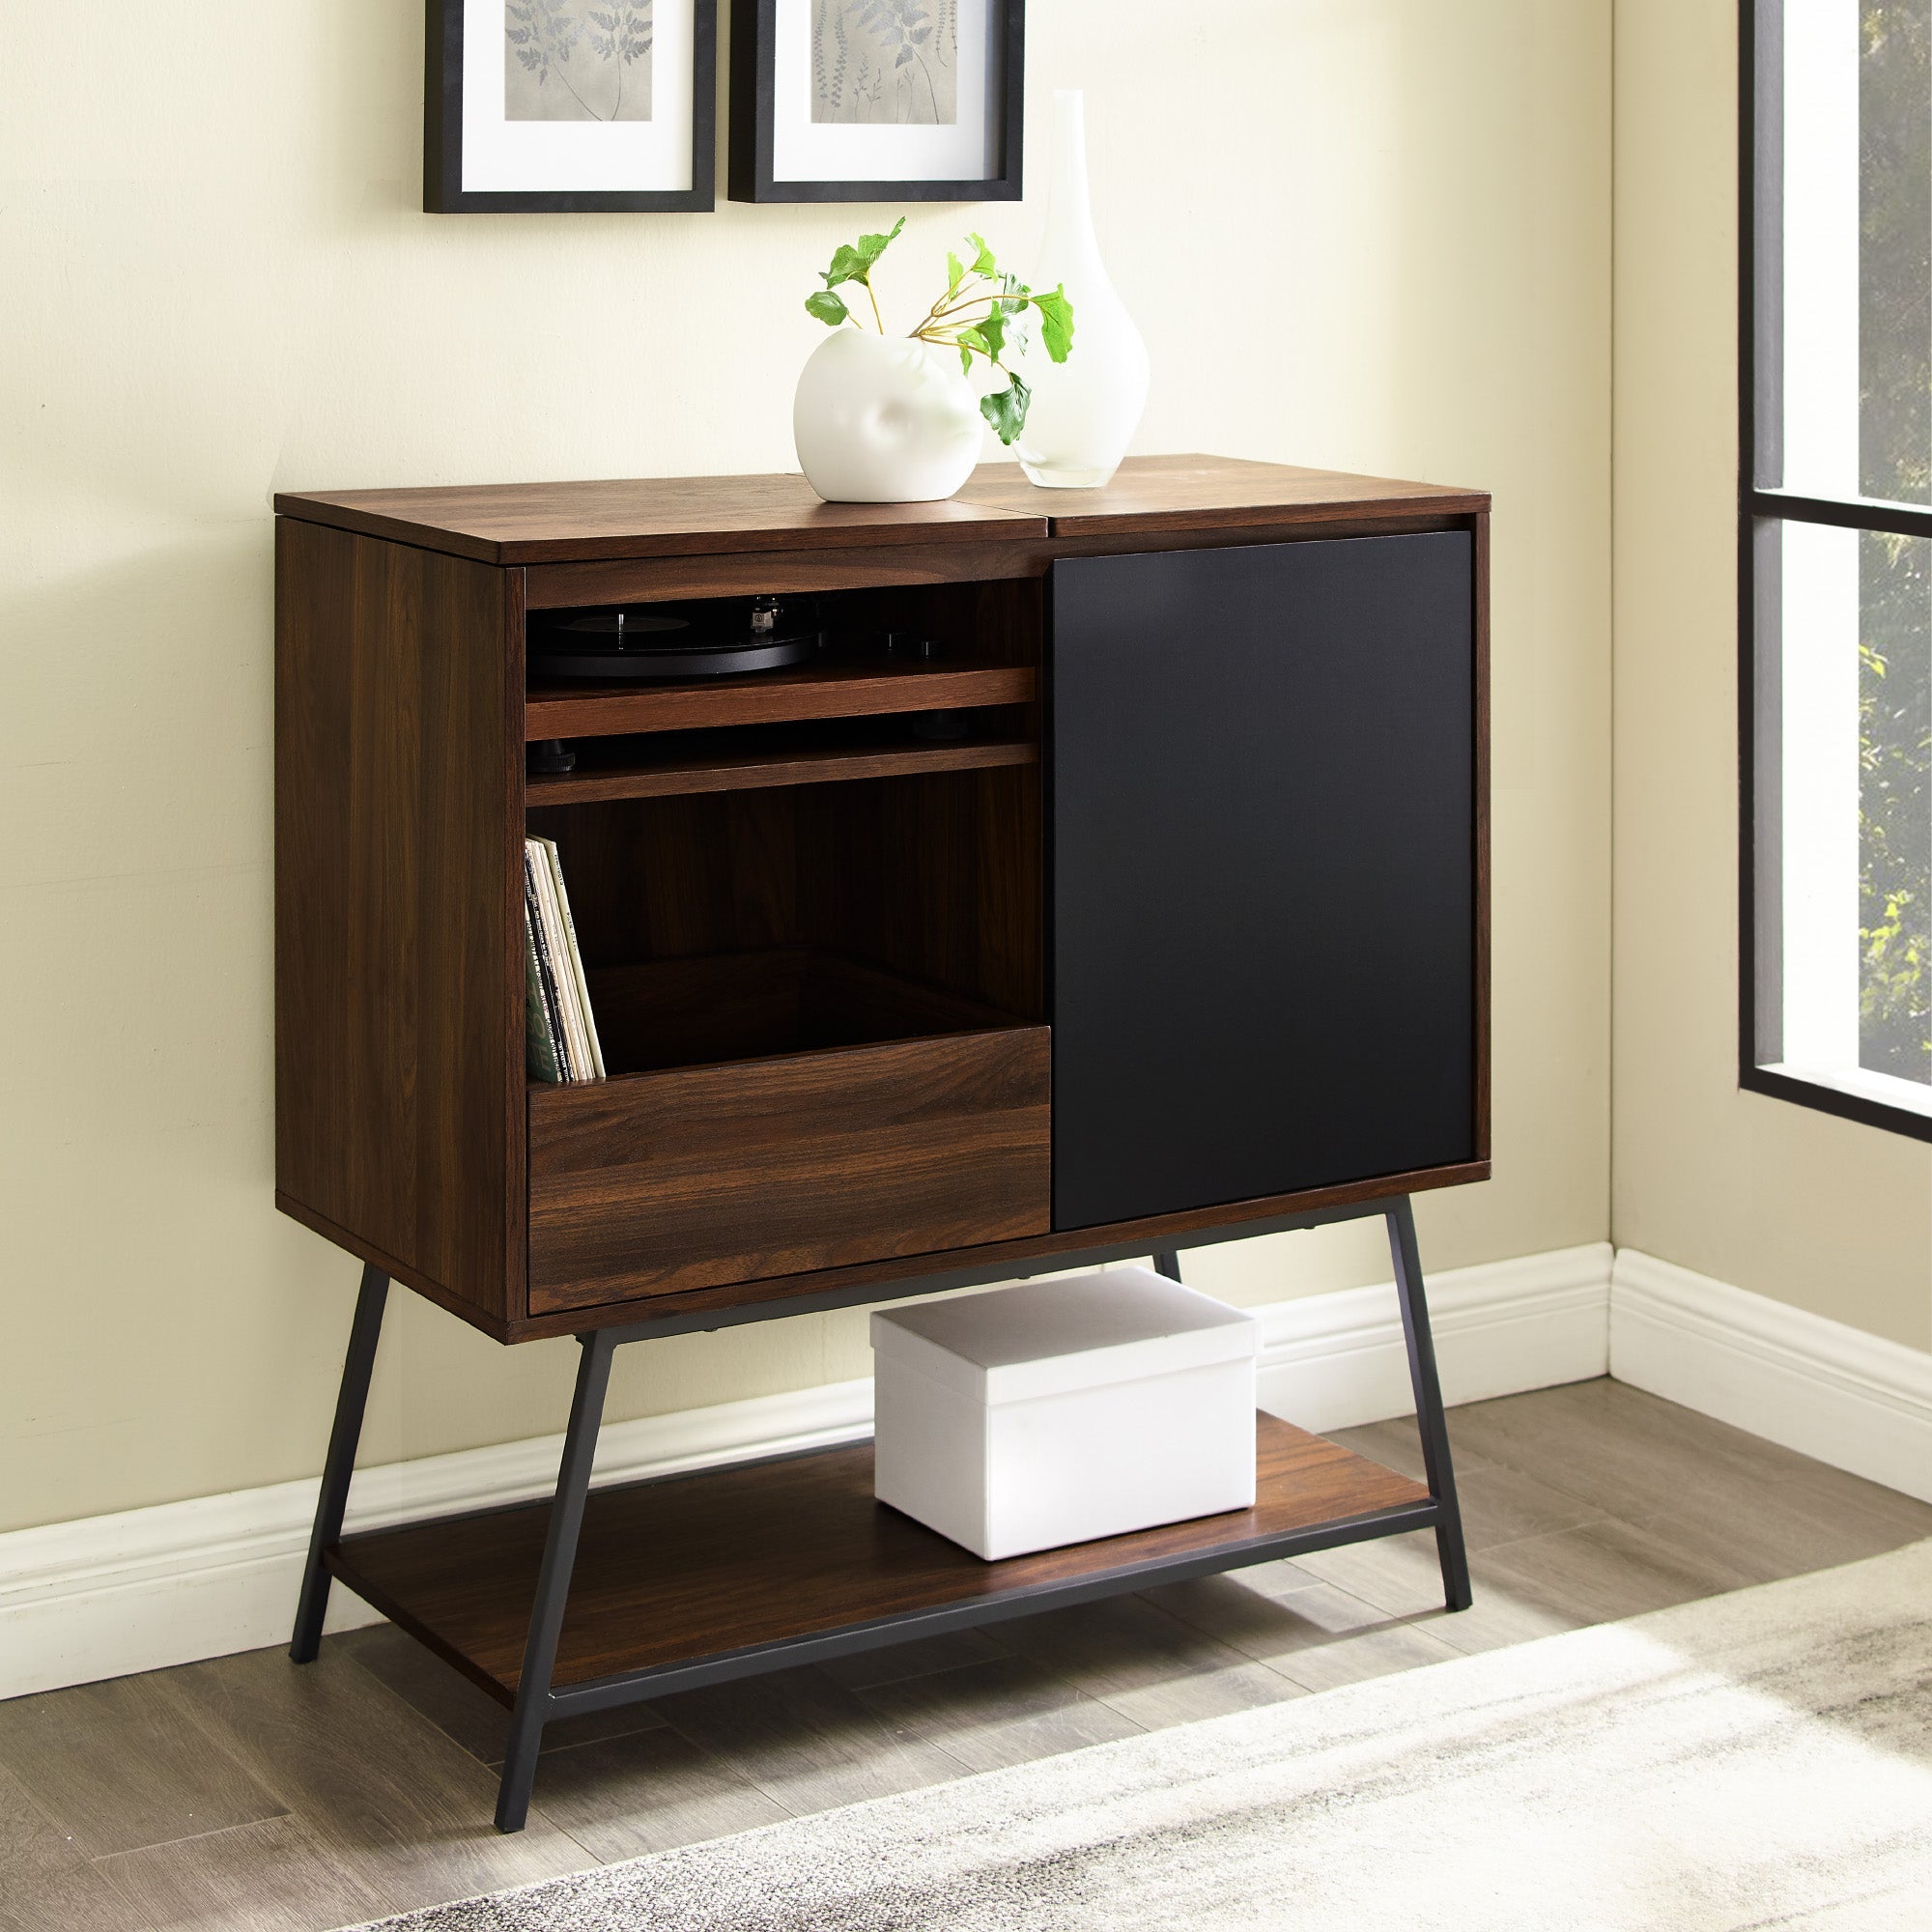 Bonnie 30" Record Player Accent Cabinet - East Shore Modern Home Furnishings